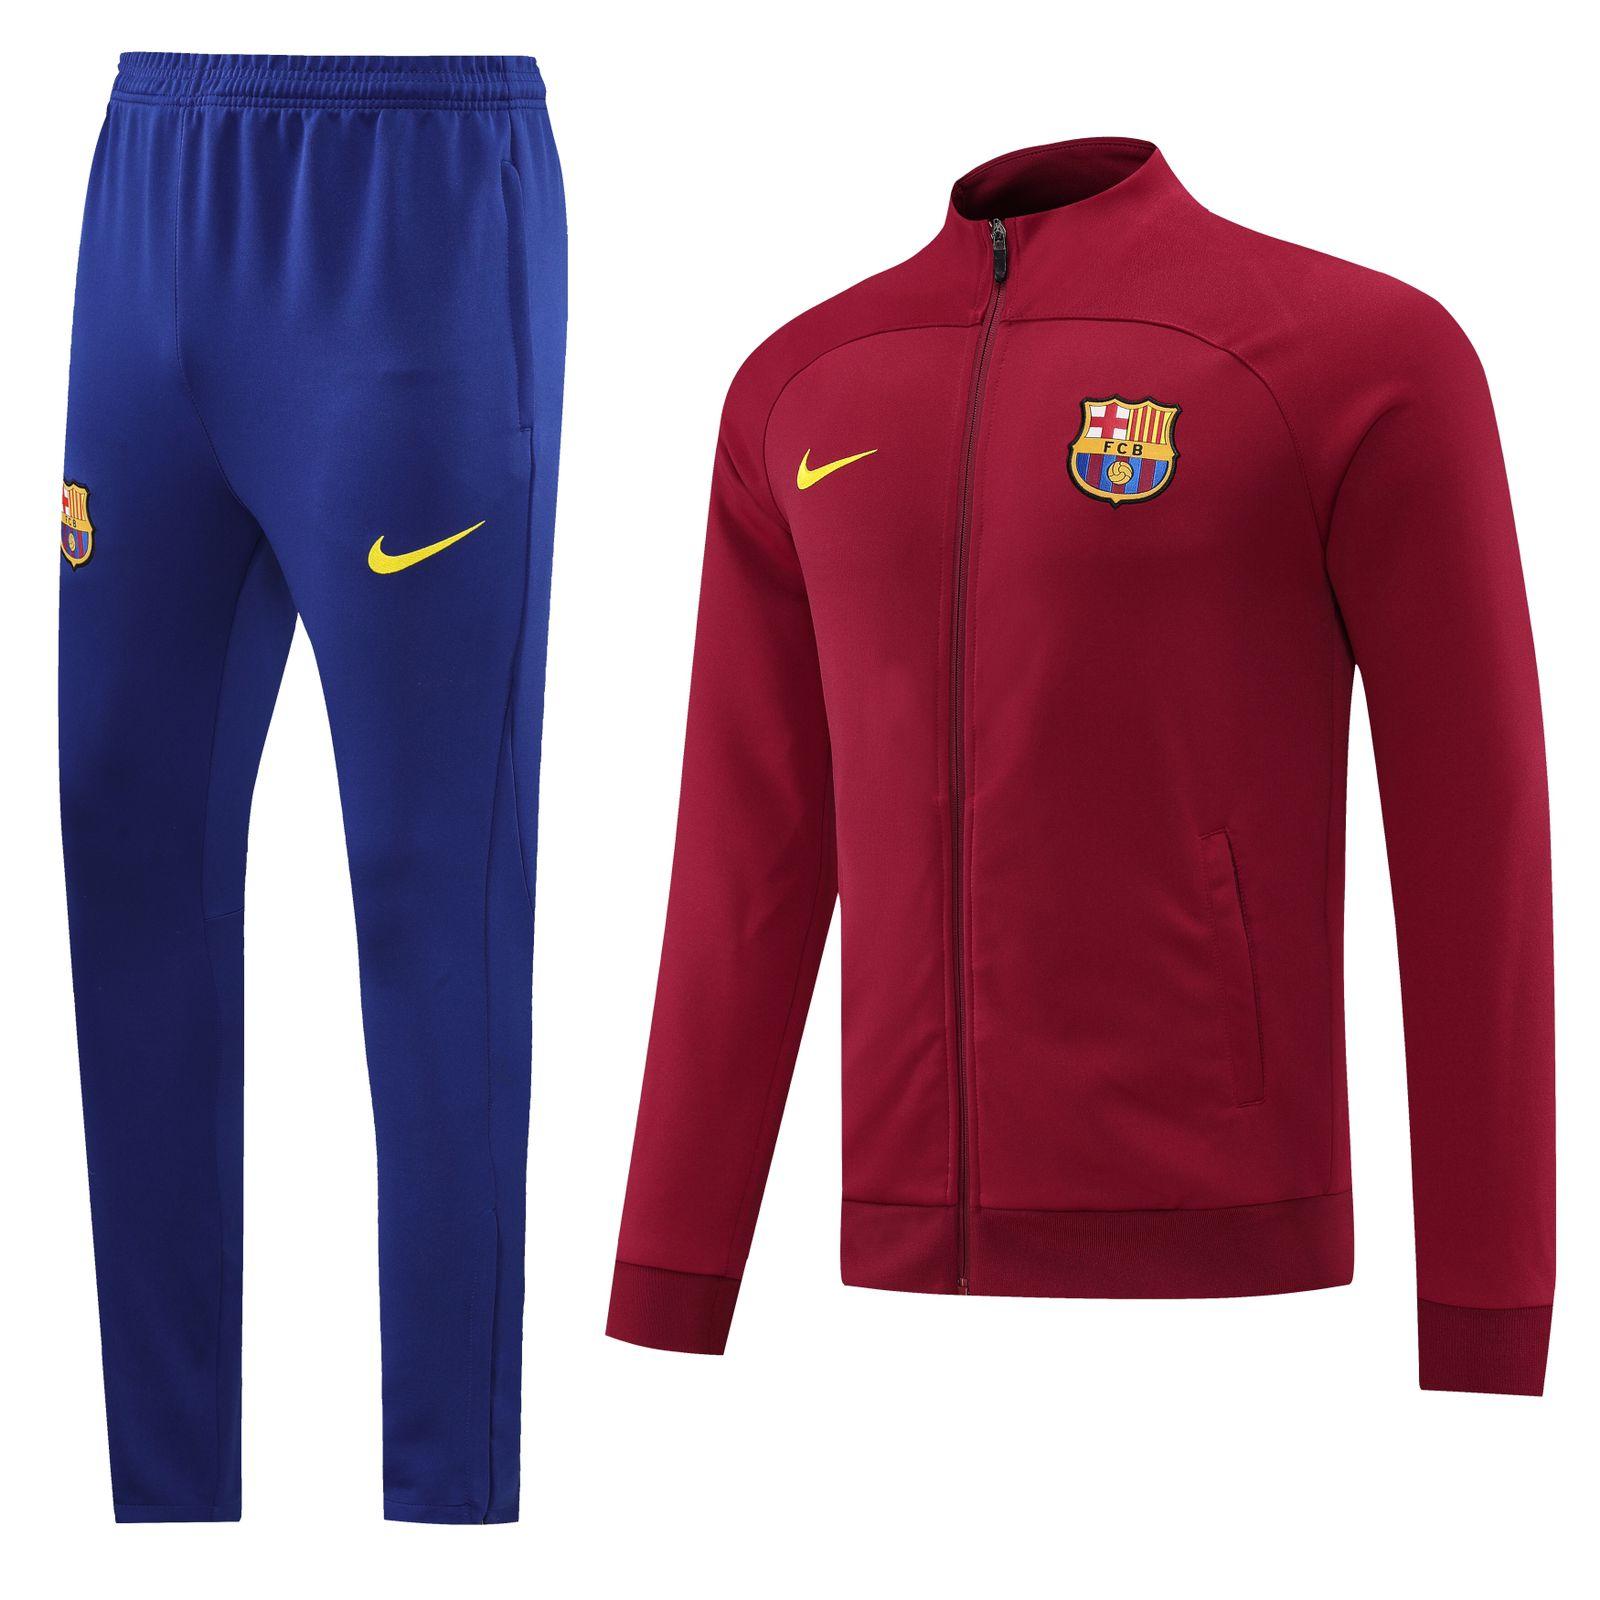 Barcelona Home Track Suit #2 22/23